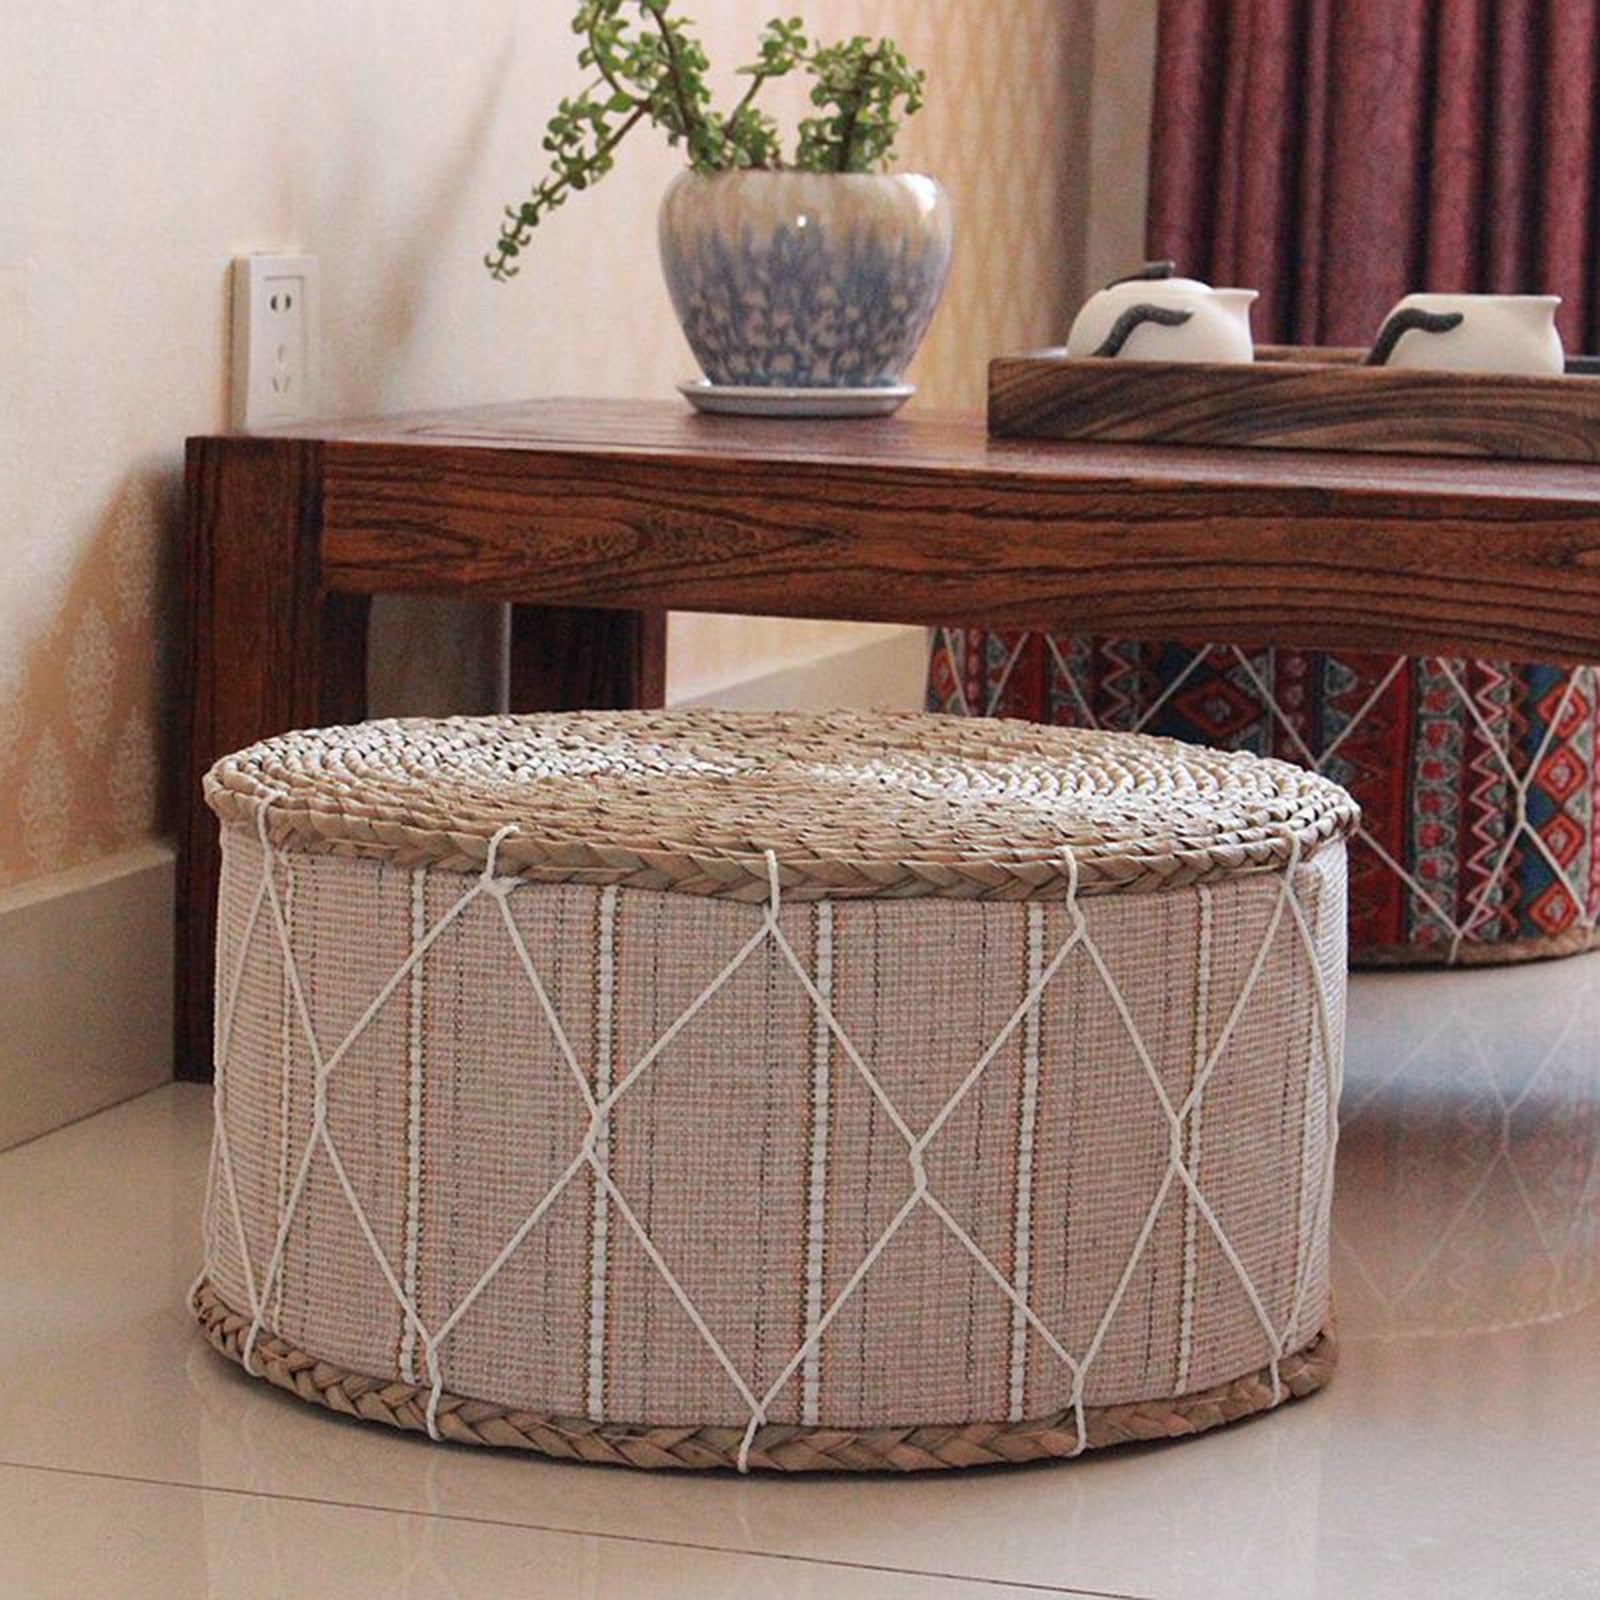 Meditation Cushion -Handwoven Straw Futon Pouf Floor Pillow Ottoman - Personal Hour for Yoga and Meditations 